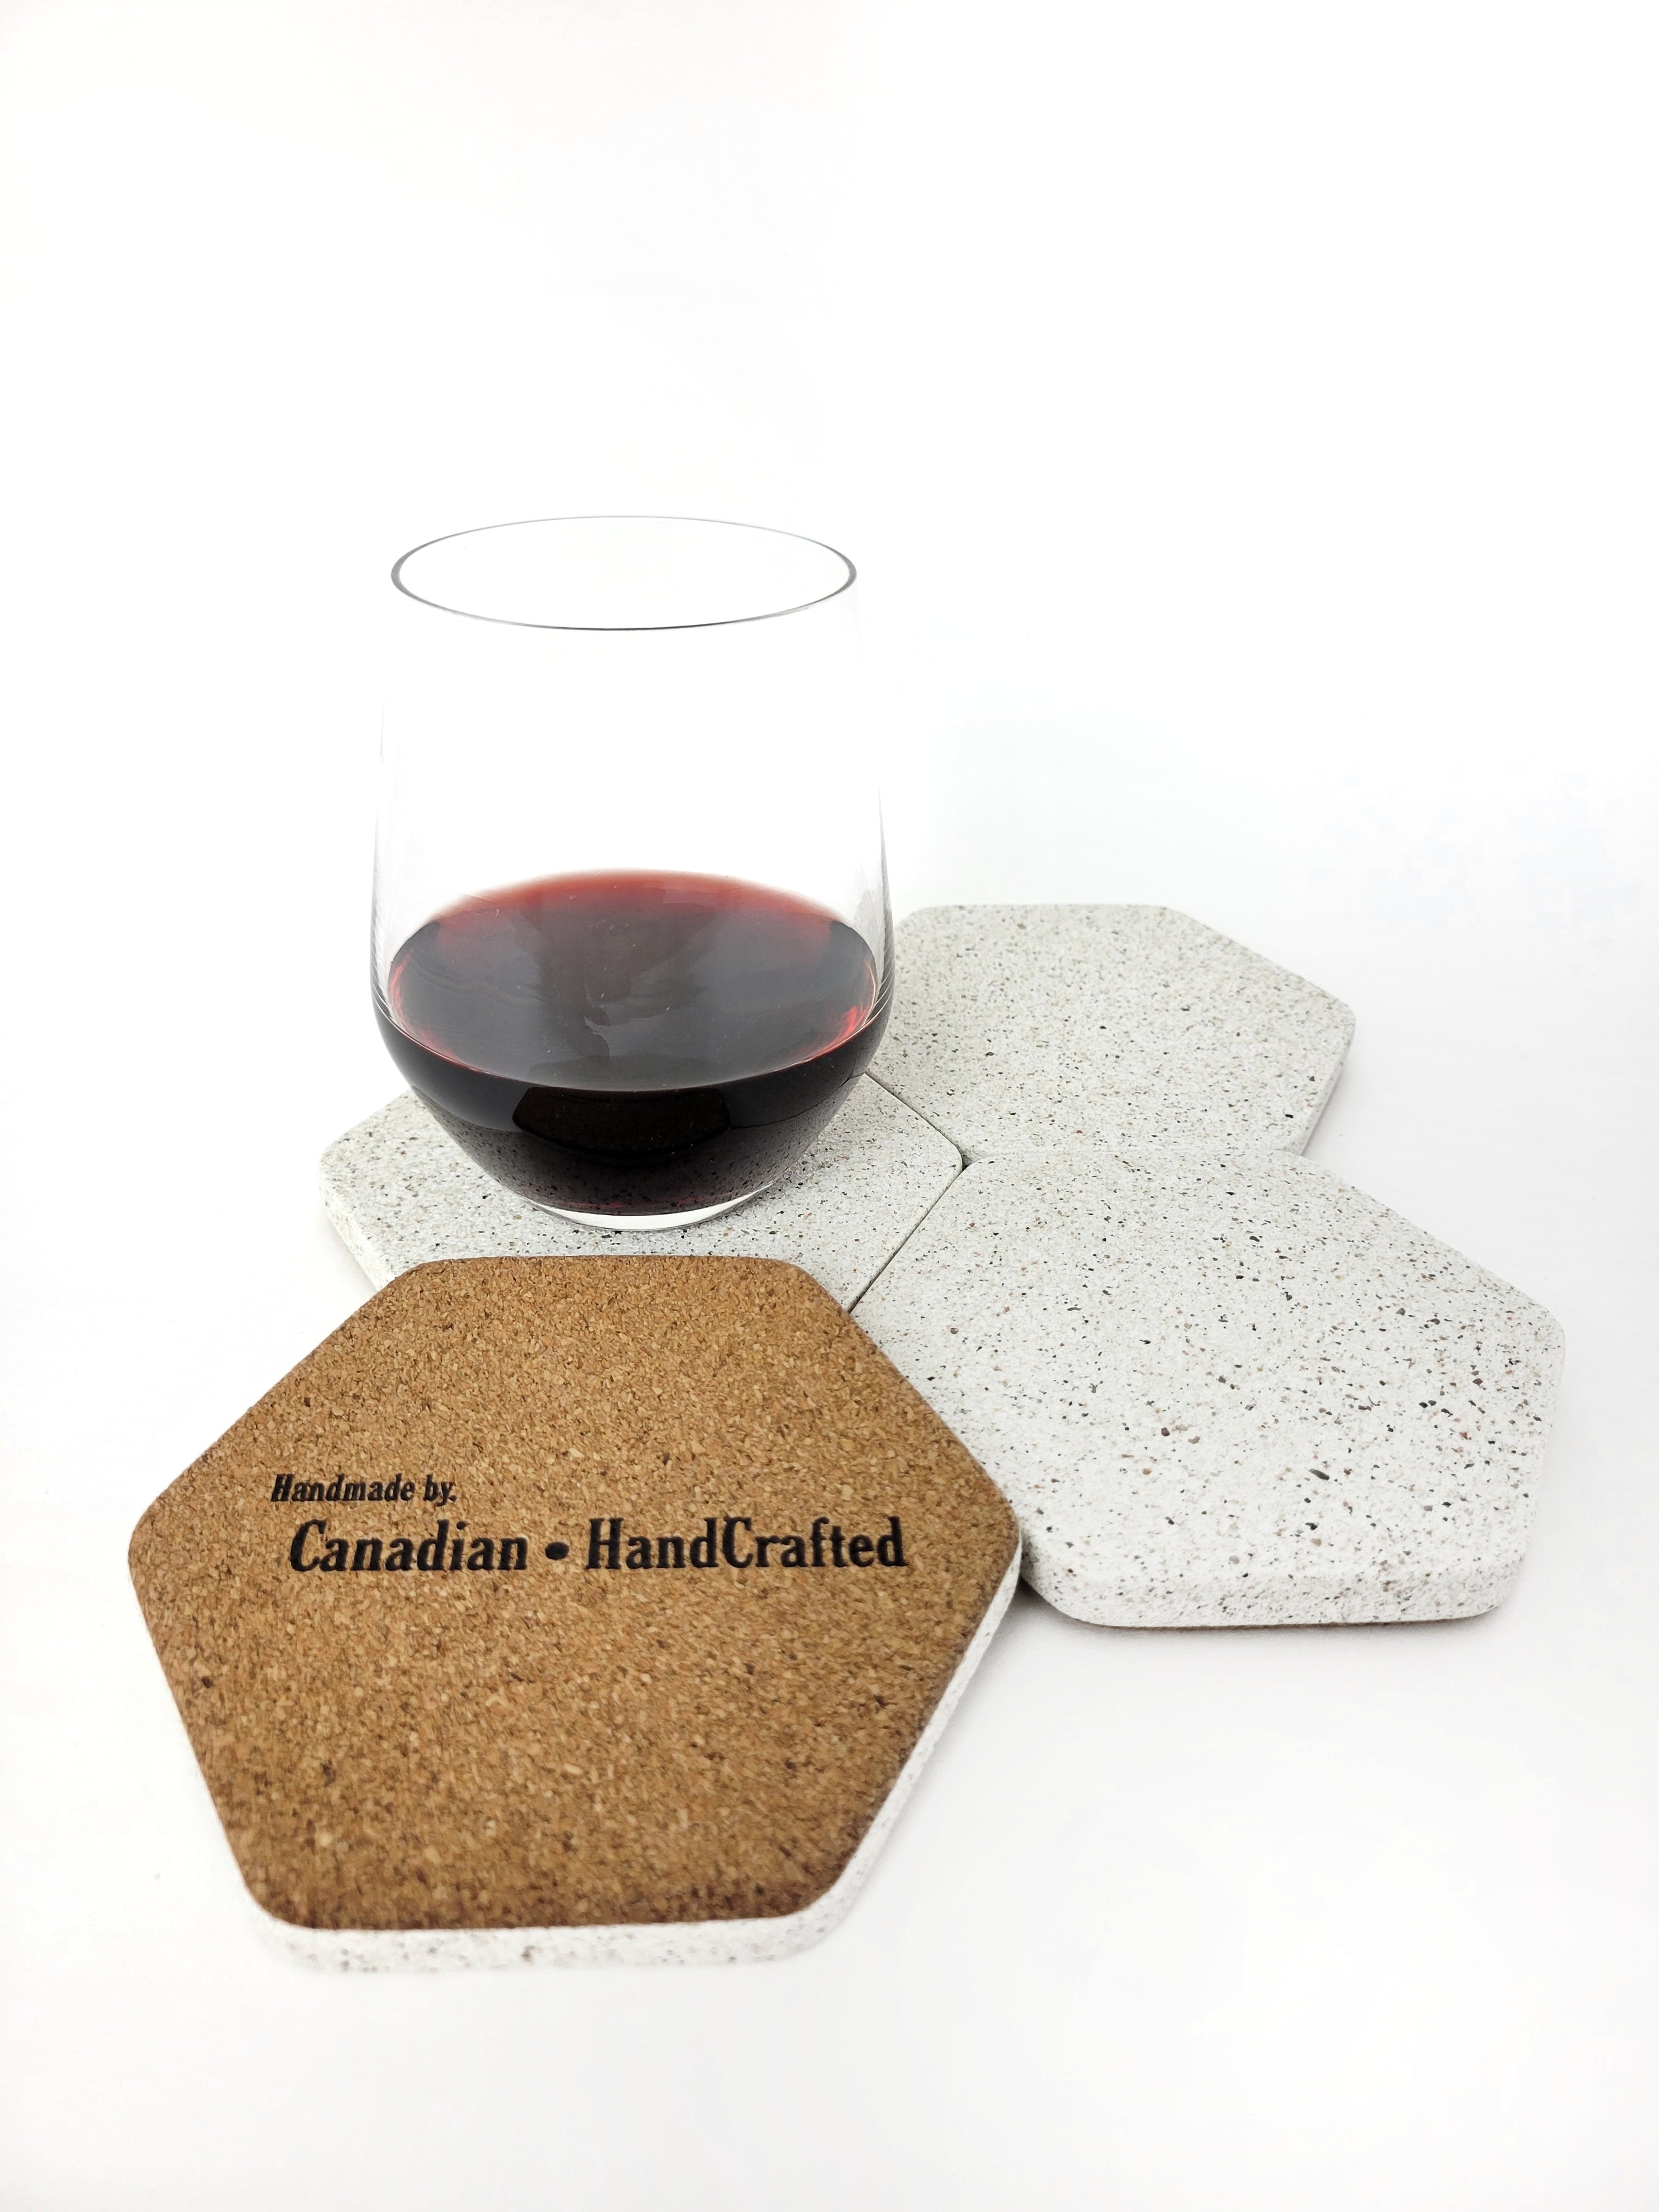 Four white sandstone concrete hexagon coasters displayed with a glass of red wine, one of the coasters is flipped upside-down displaying a soft cork bottom.